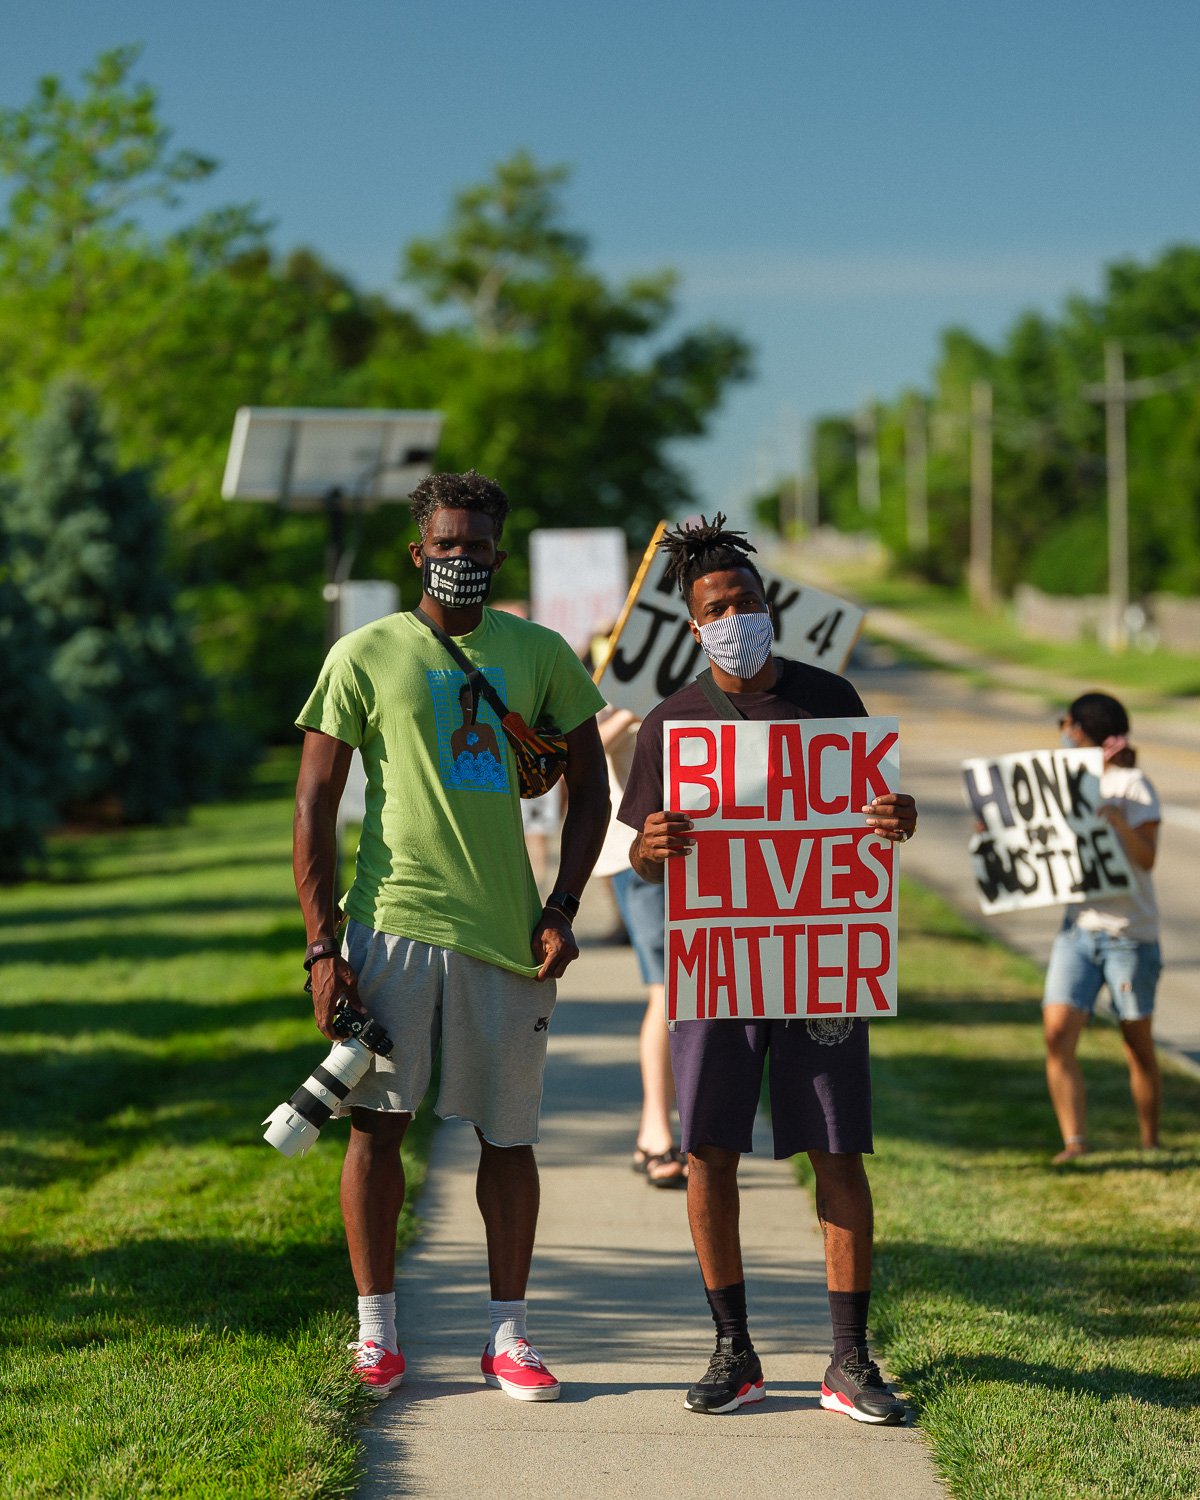  Black Lives Matter protestors have been stationed outside the gated community where Douglas County Attorney Don Kleine lives, 6 hours every morning for nearly a month, Omaha, NE, for The New York Times, 2020 